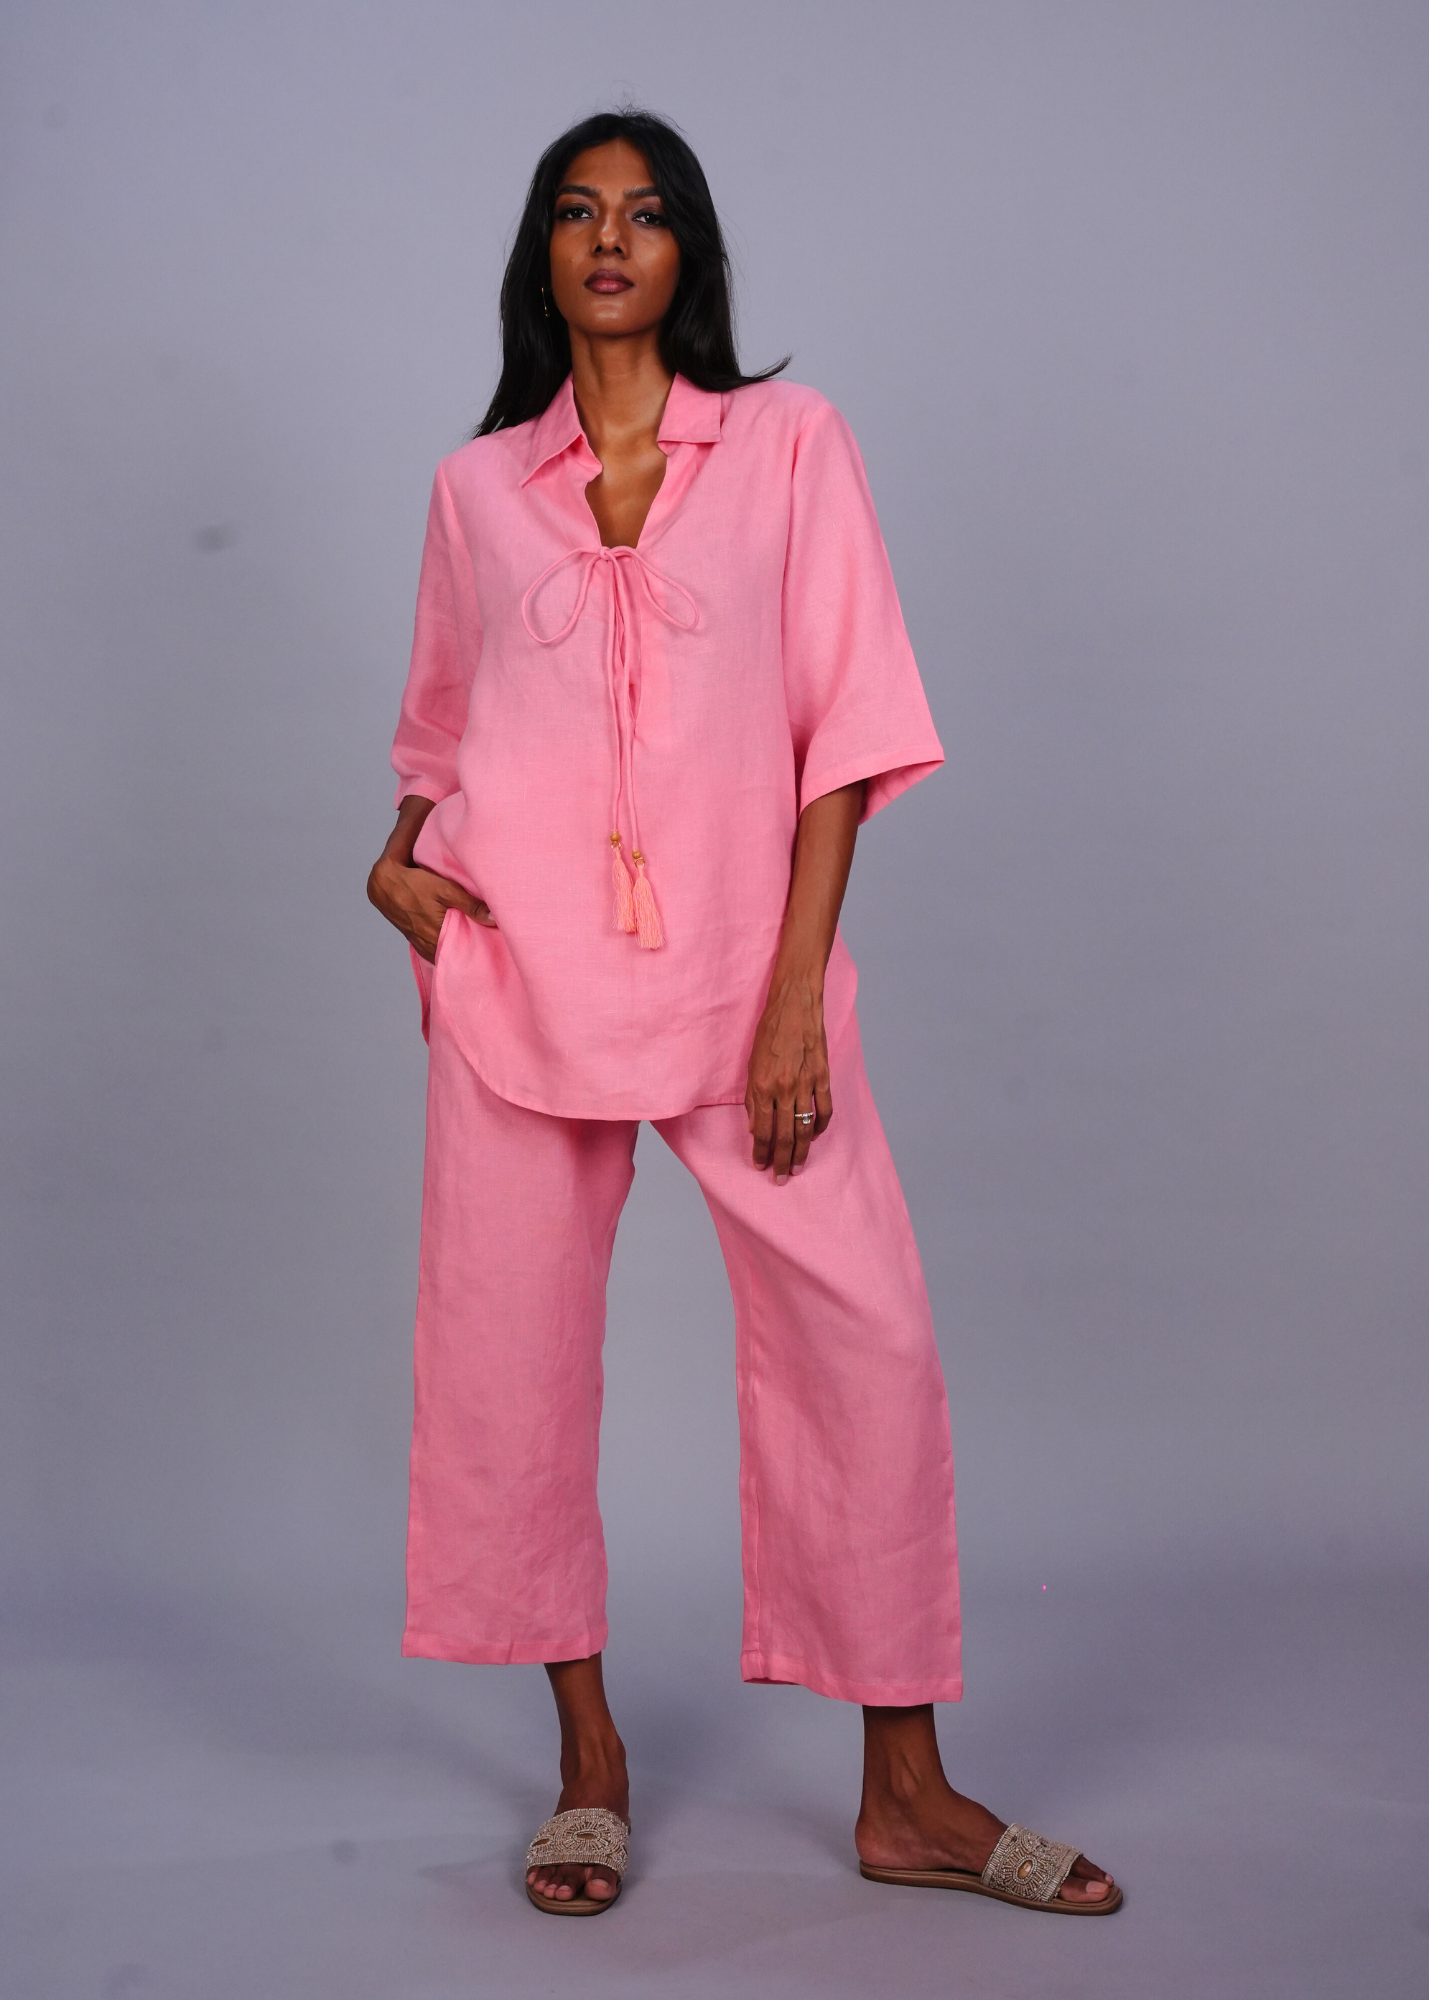 Tassel Tunic - Guava Linen, a product by Azurina